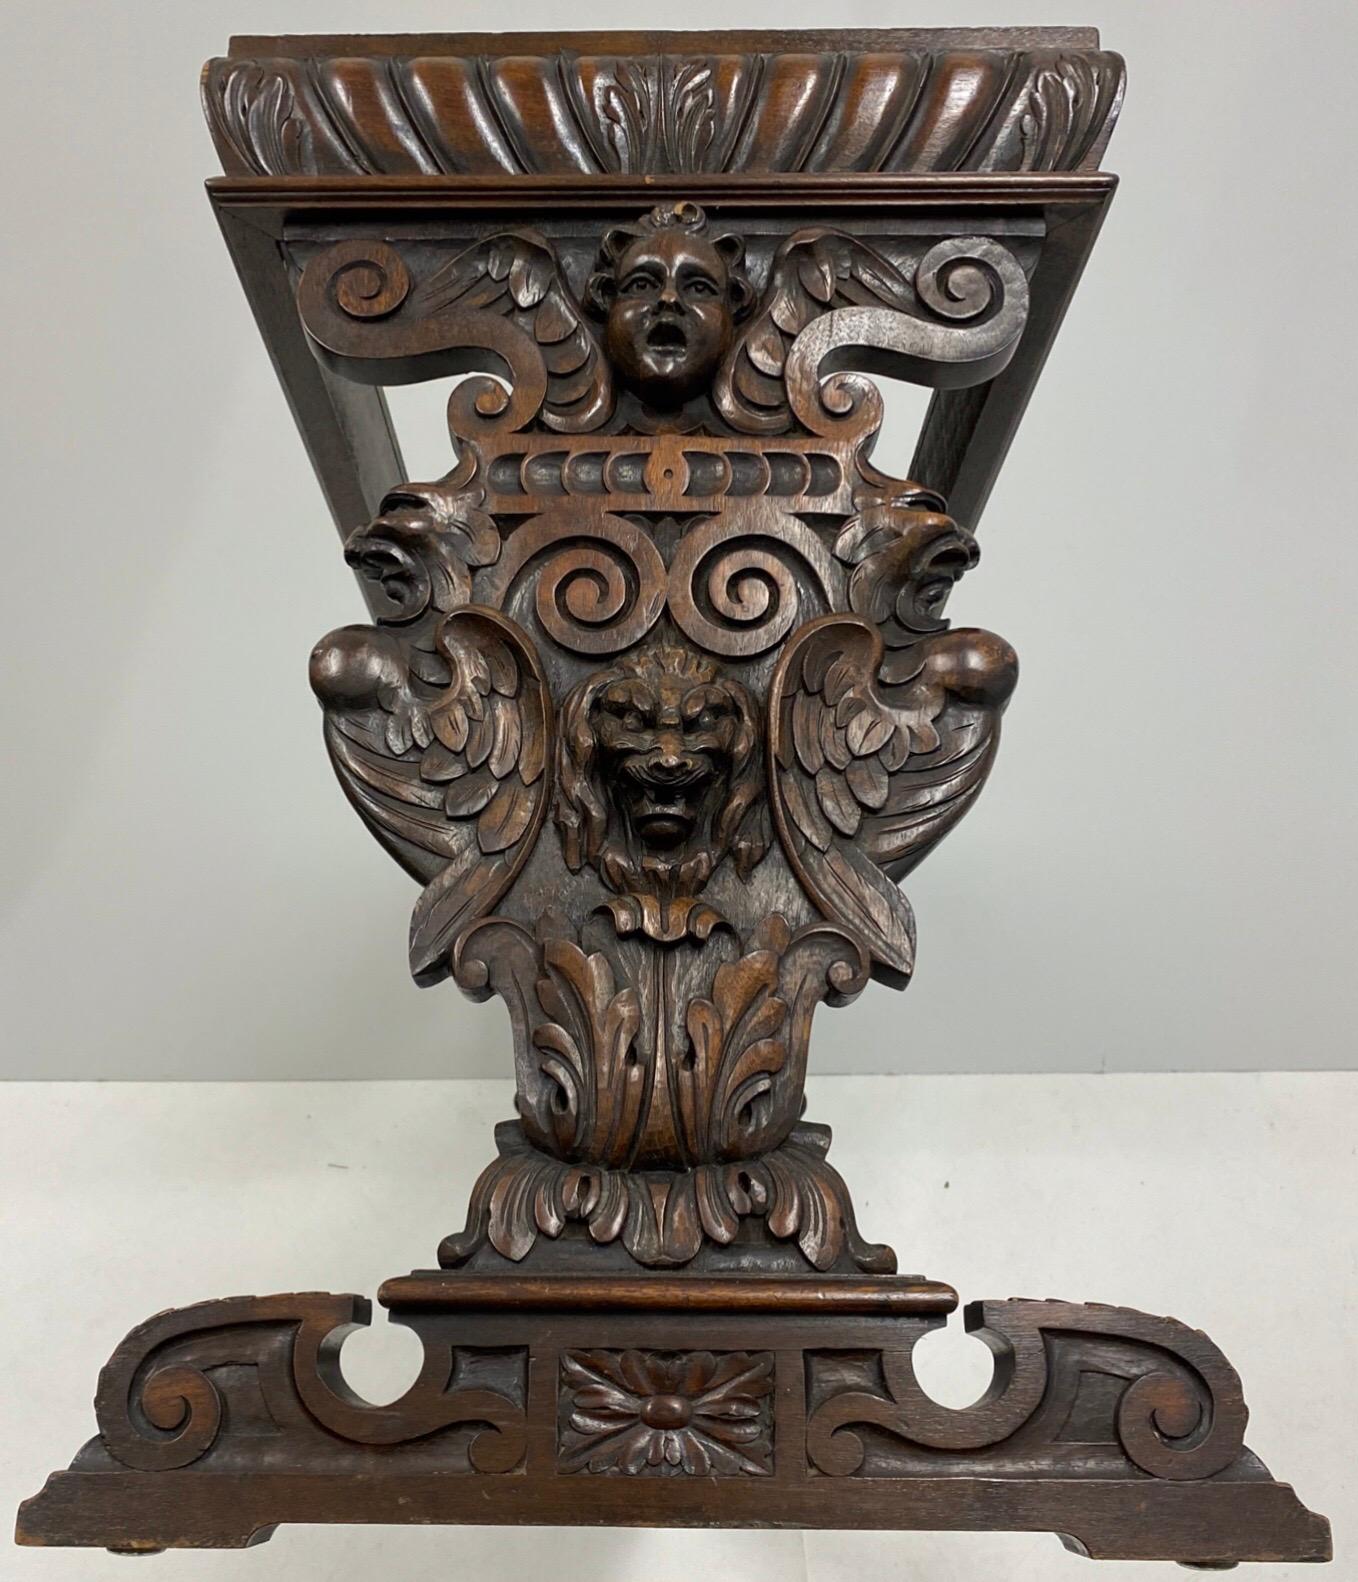 This is a wonderful Italian carved walnut console table with a beautiful siena marble top that is not attached. The carved relief depicts both dog and putti busts. It is in very good condition.